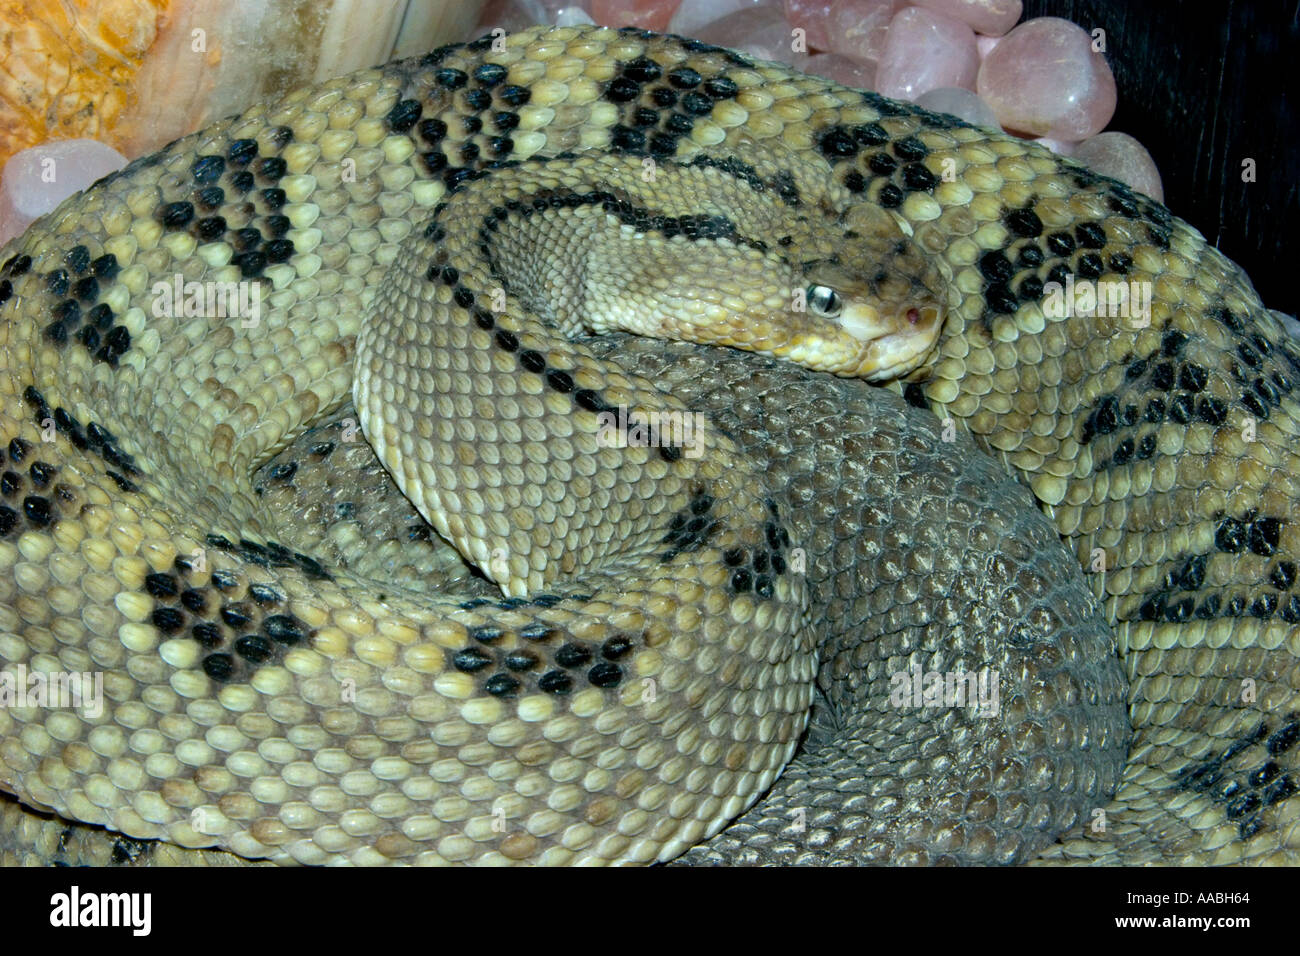 RS-197D LOWLAND SWAMP VIPER Stock Photo